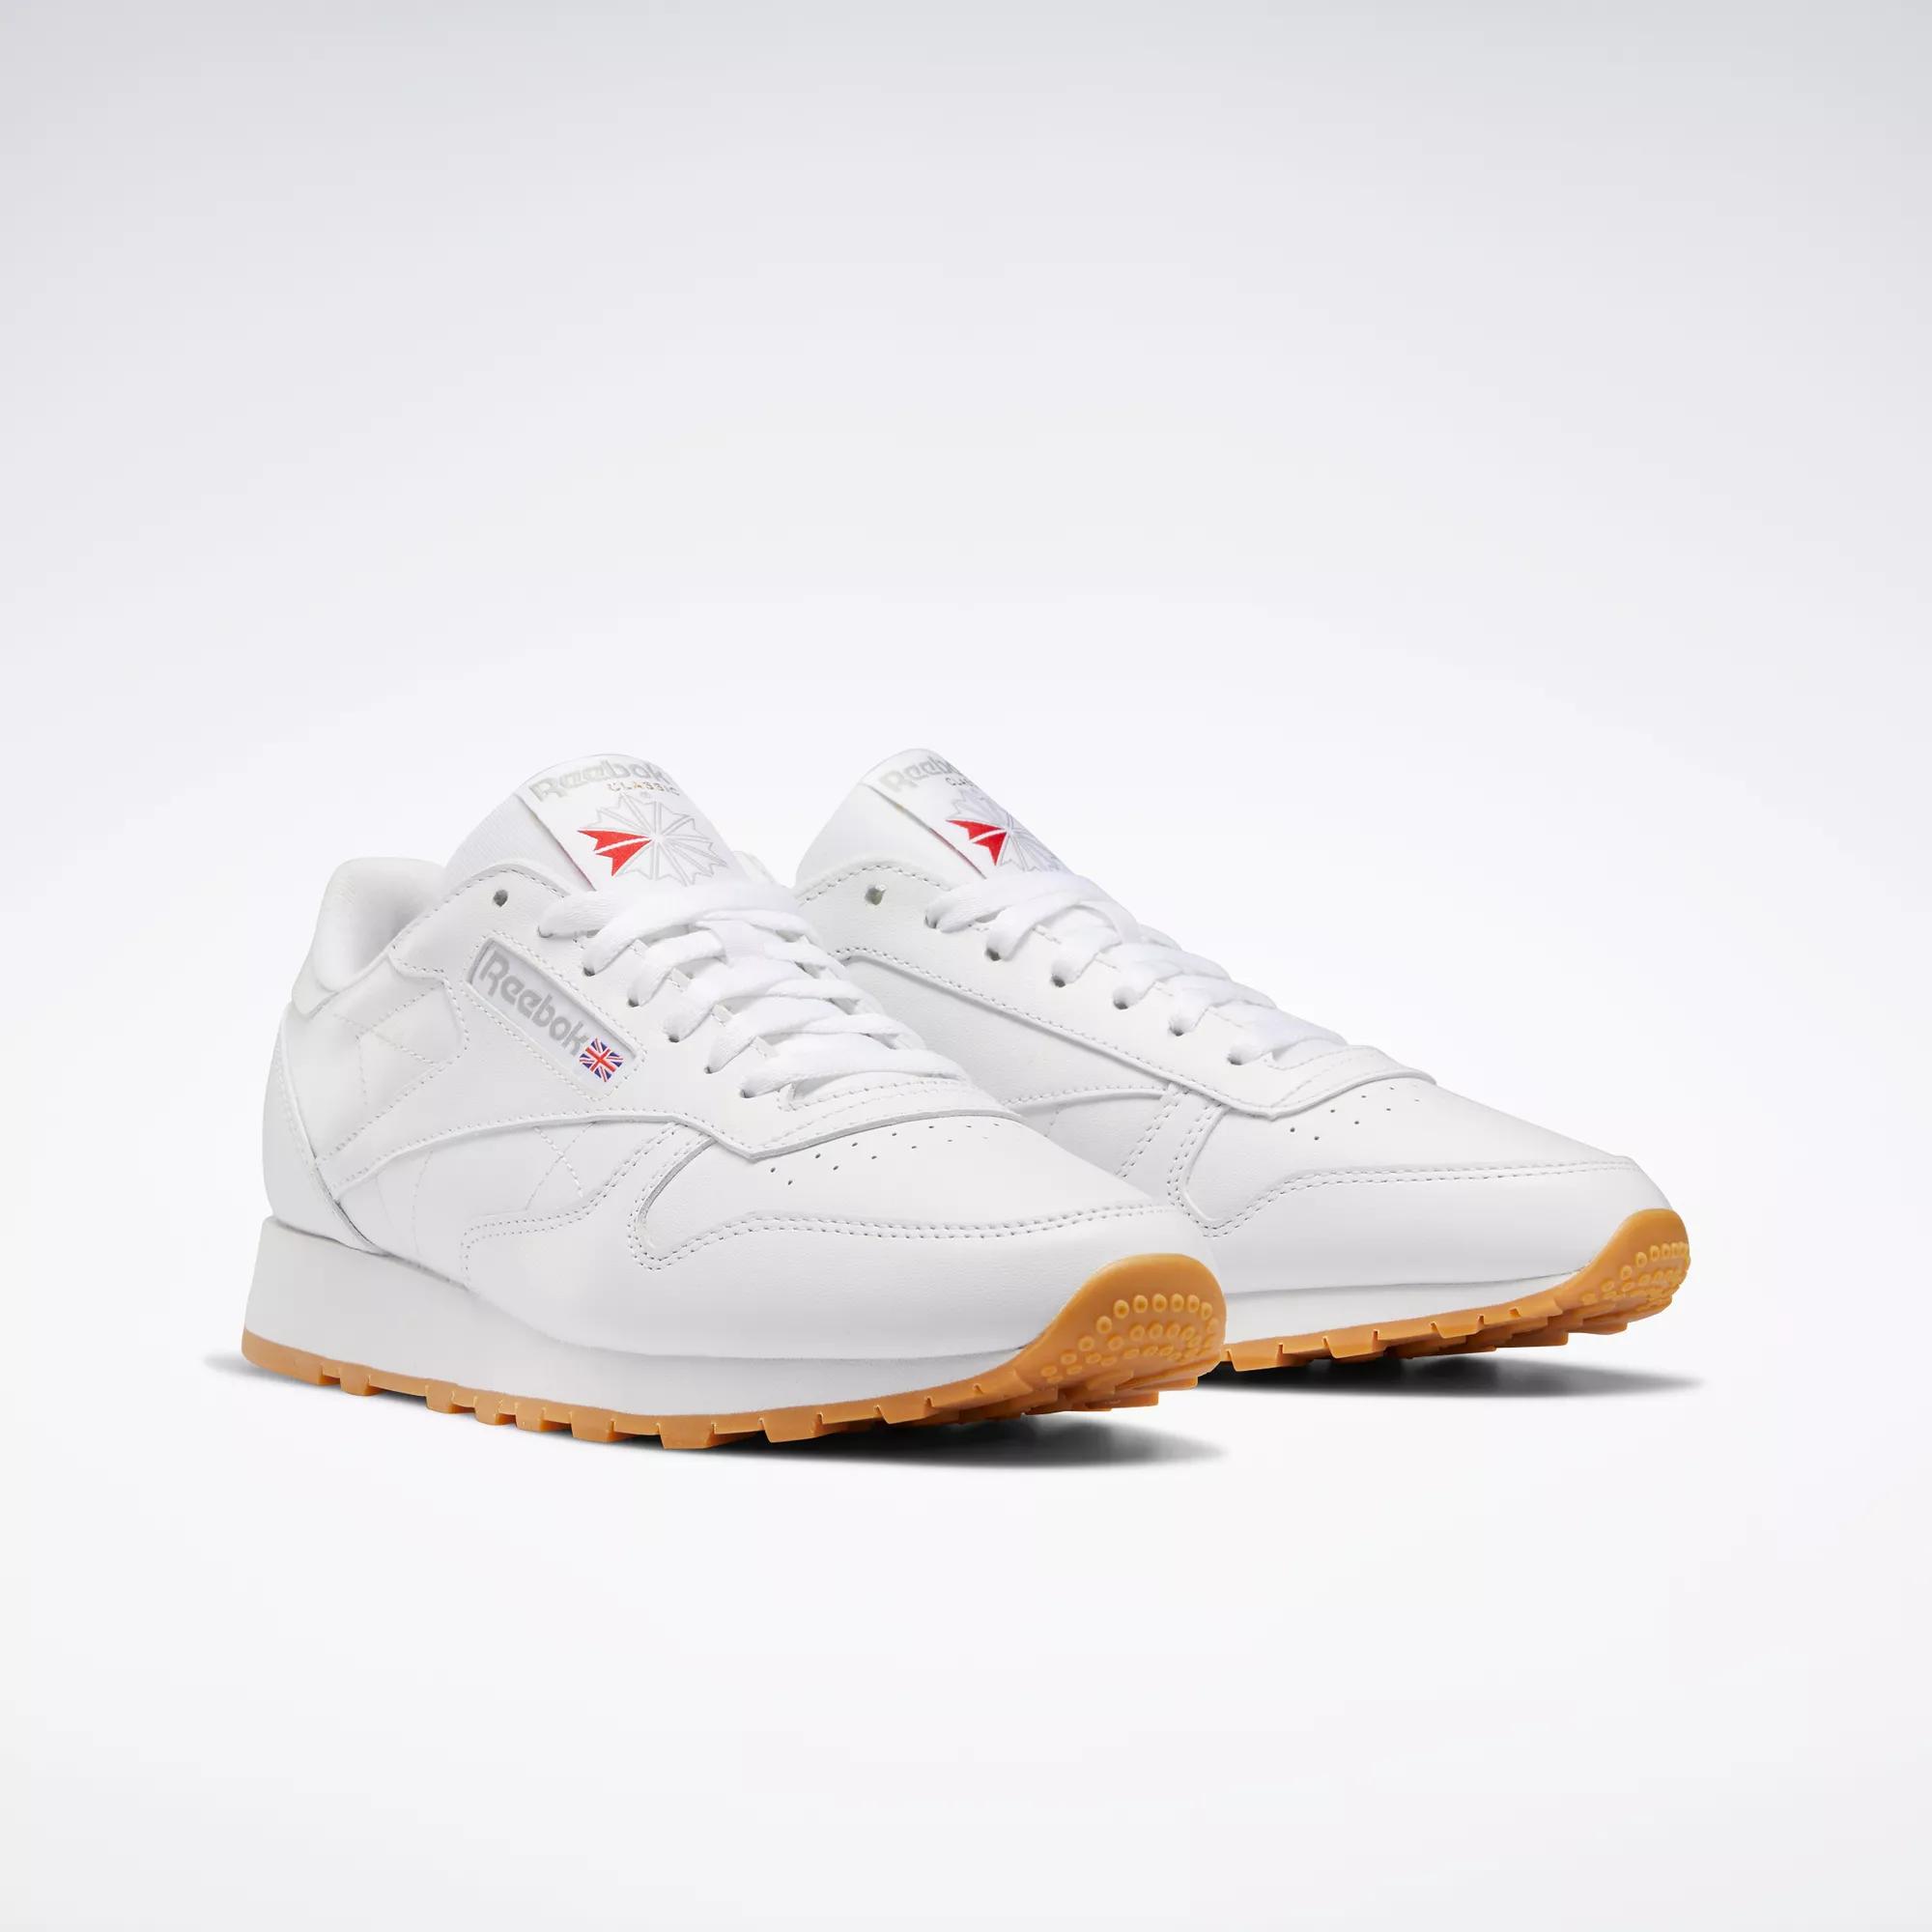 Classic Leather Shoes - Ftwr White / Pure Grey 3 / Reebok Rubber Gum-03 Reebok